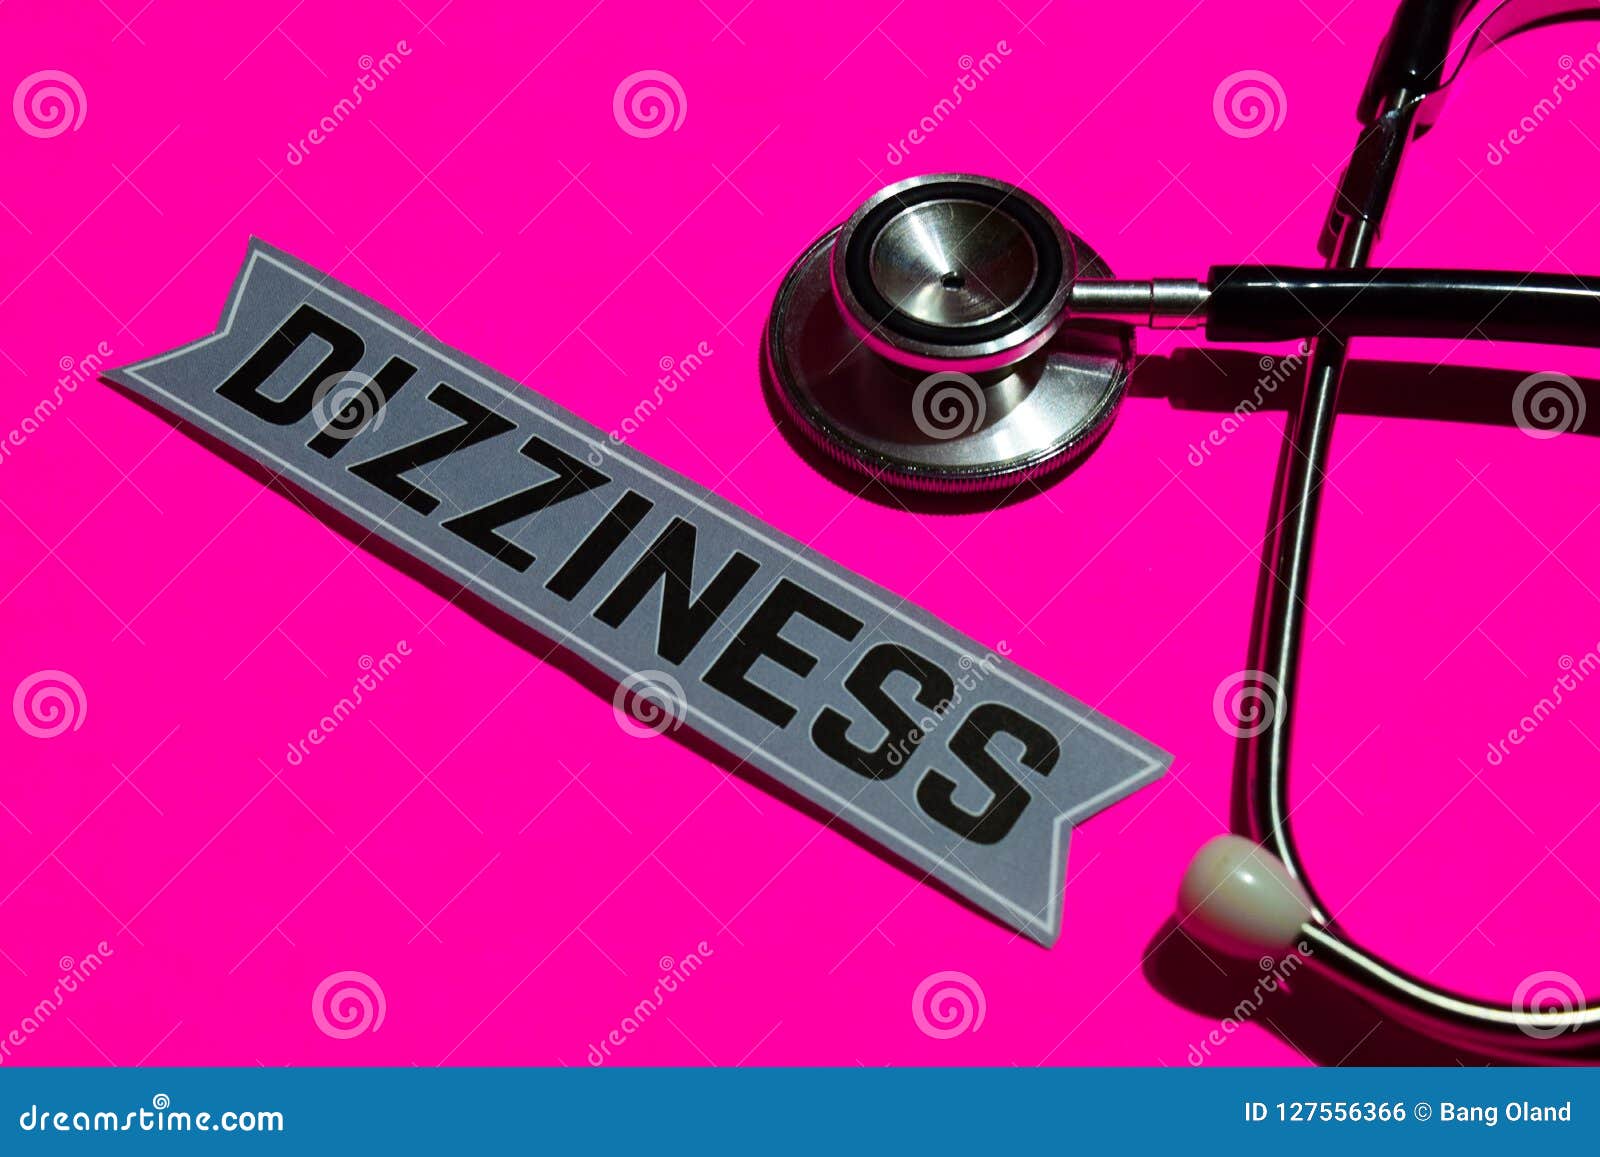 dizziness on the paper with medicare concept